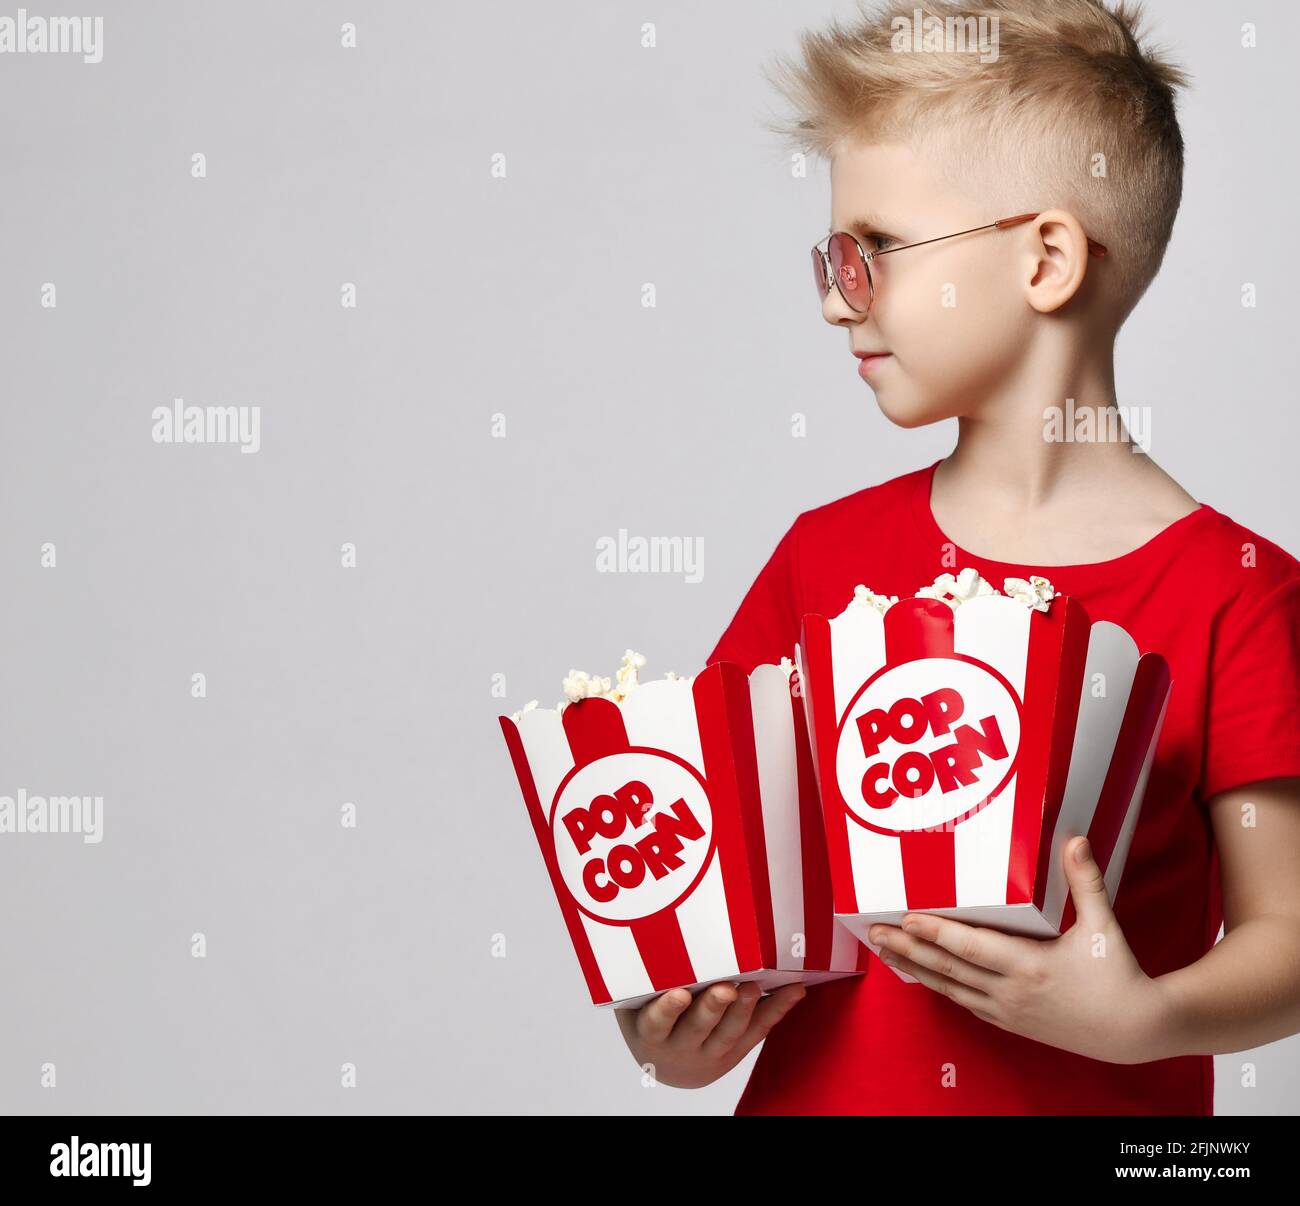 Stylish cheerful boy child in red t-shirt holding pop corn in hands looking away over white background. Trendy casual children Stock Photo